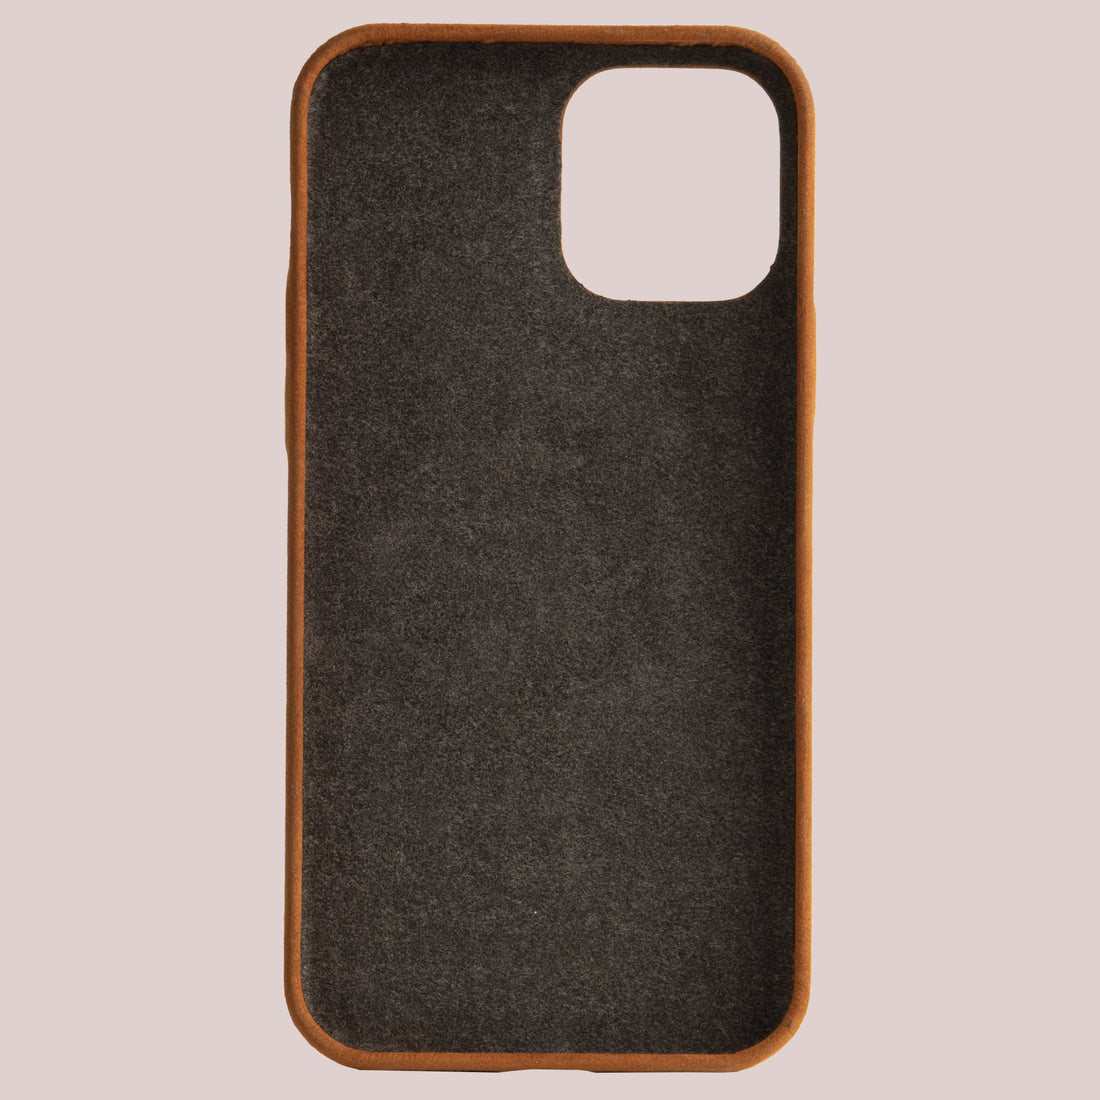 Baxter Card Case for iPhone 12 Mini - Vintage Tan